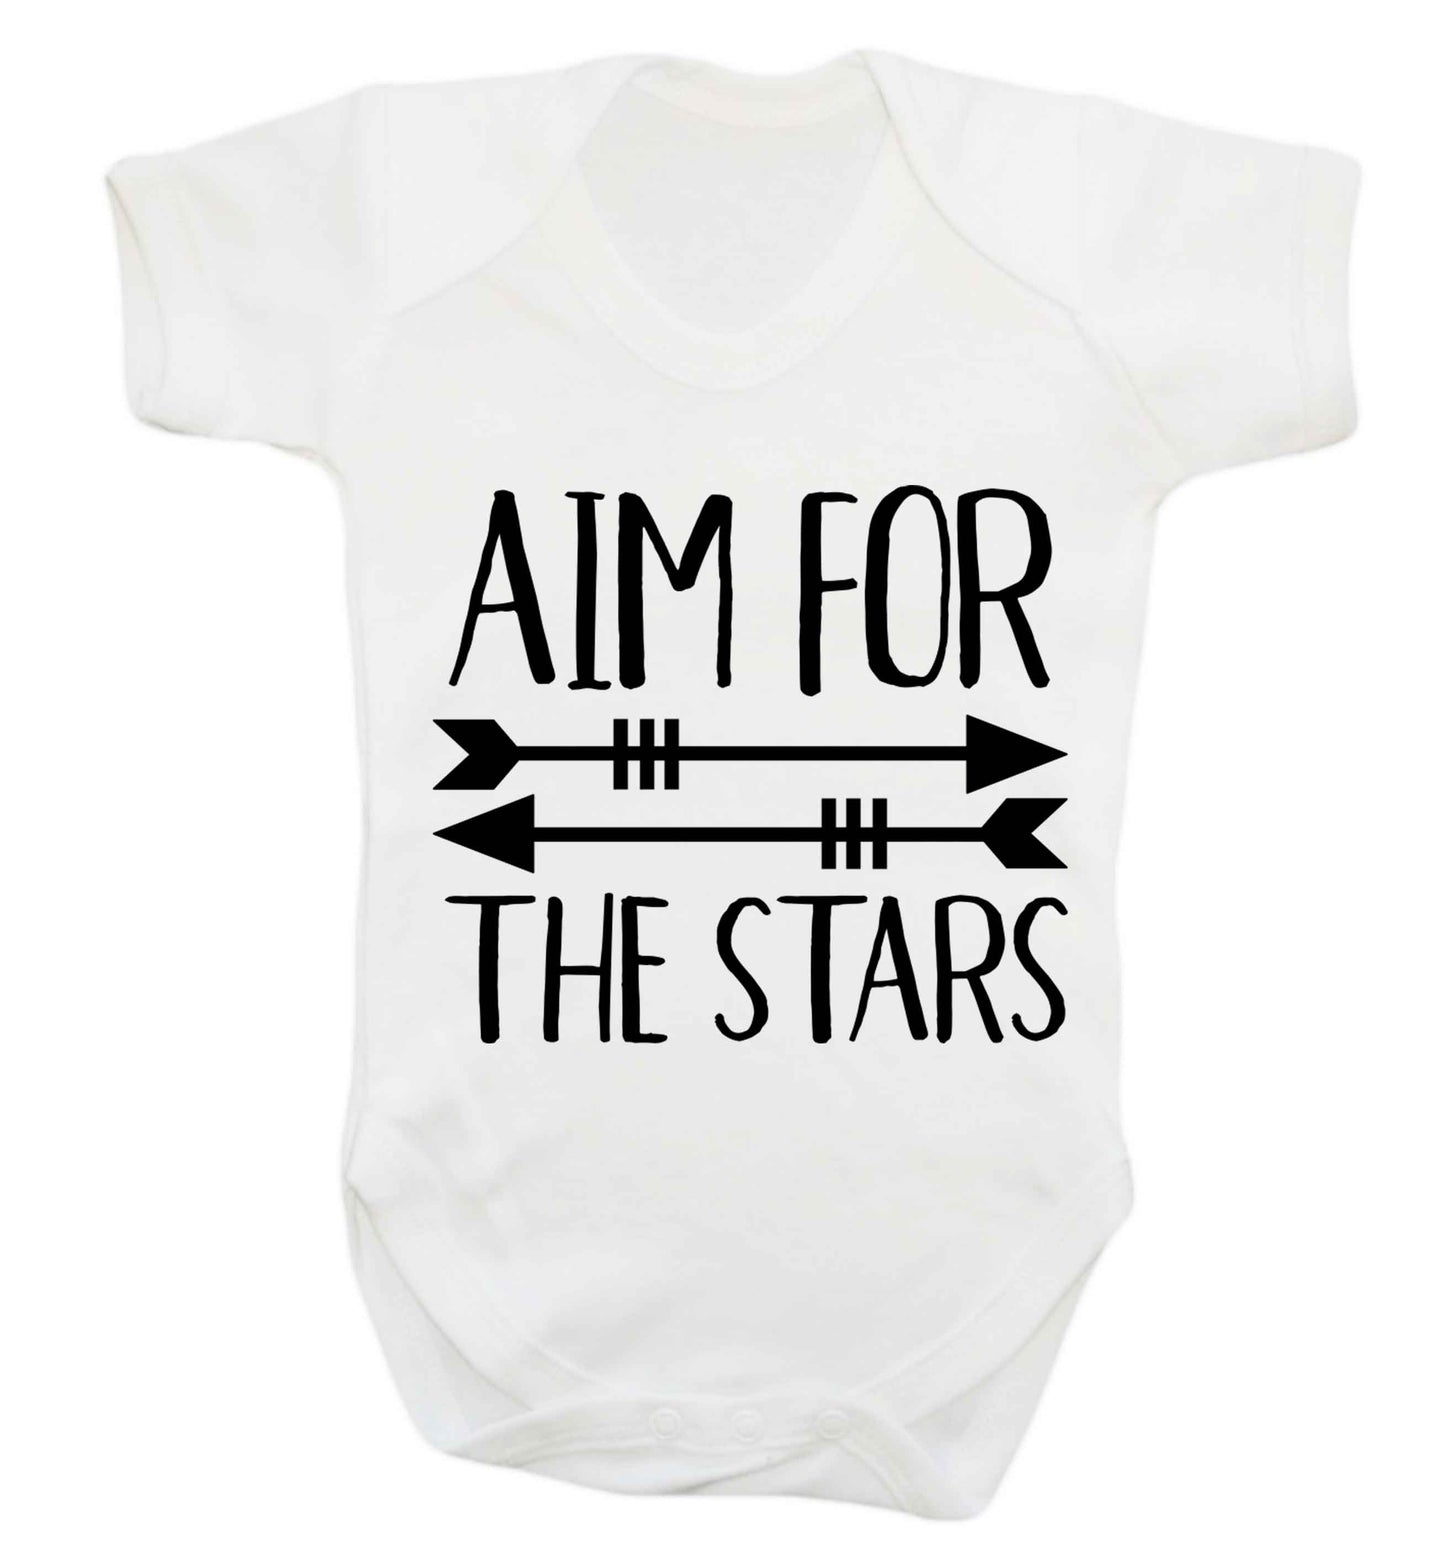 Aim for the stars Baby Vest white 18-24 months